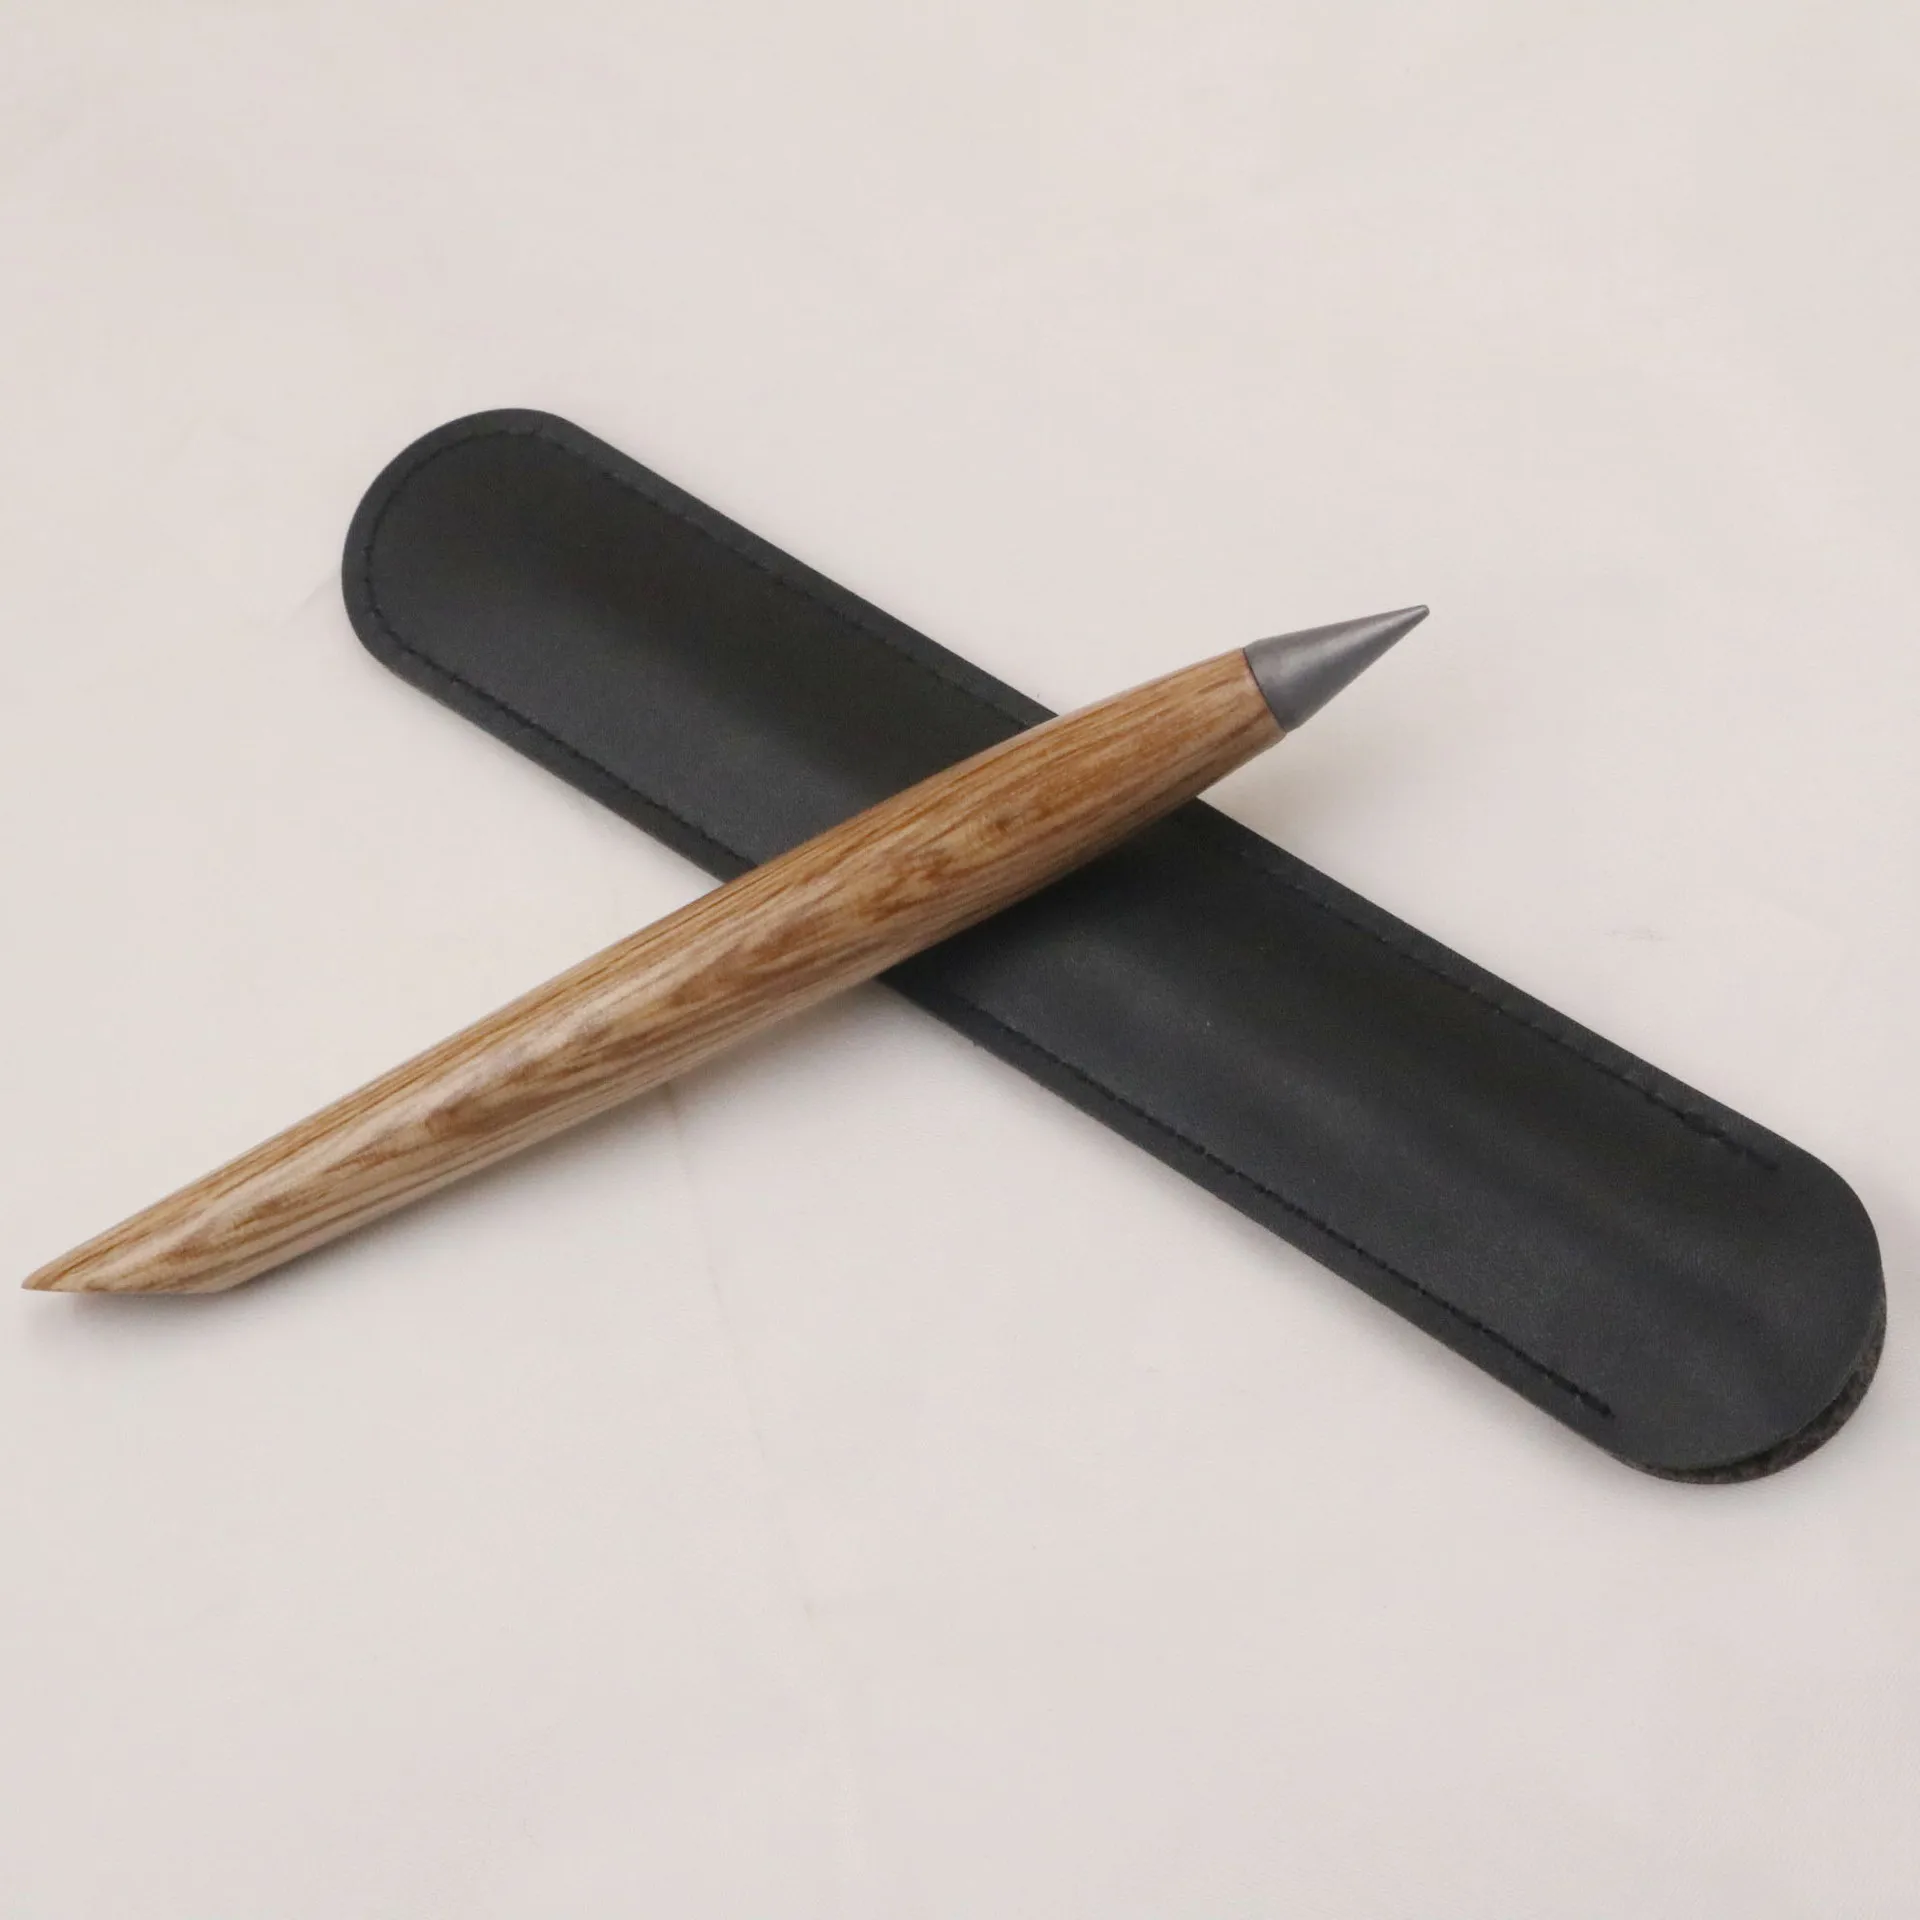 Minimalist Eternal Forever Pencil Anodized Caved Wood Inkless Pen